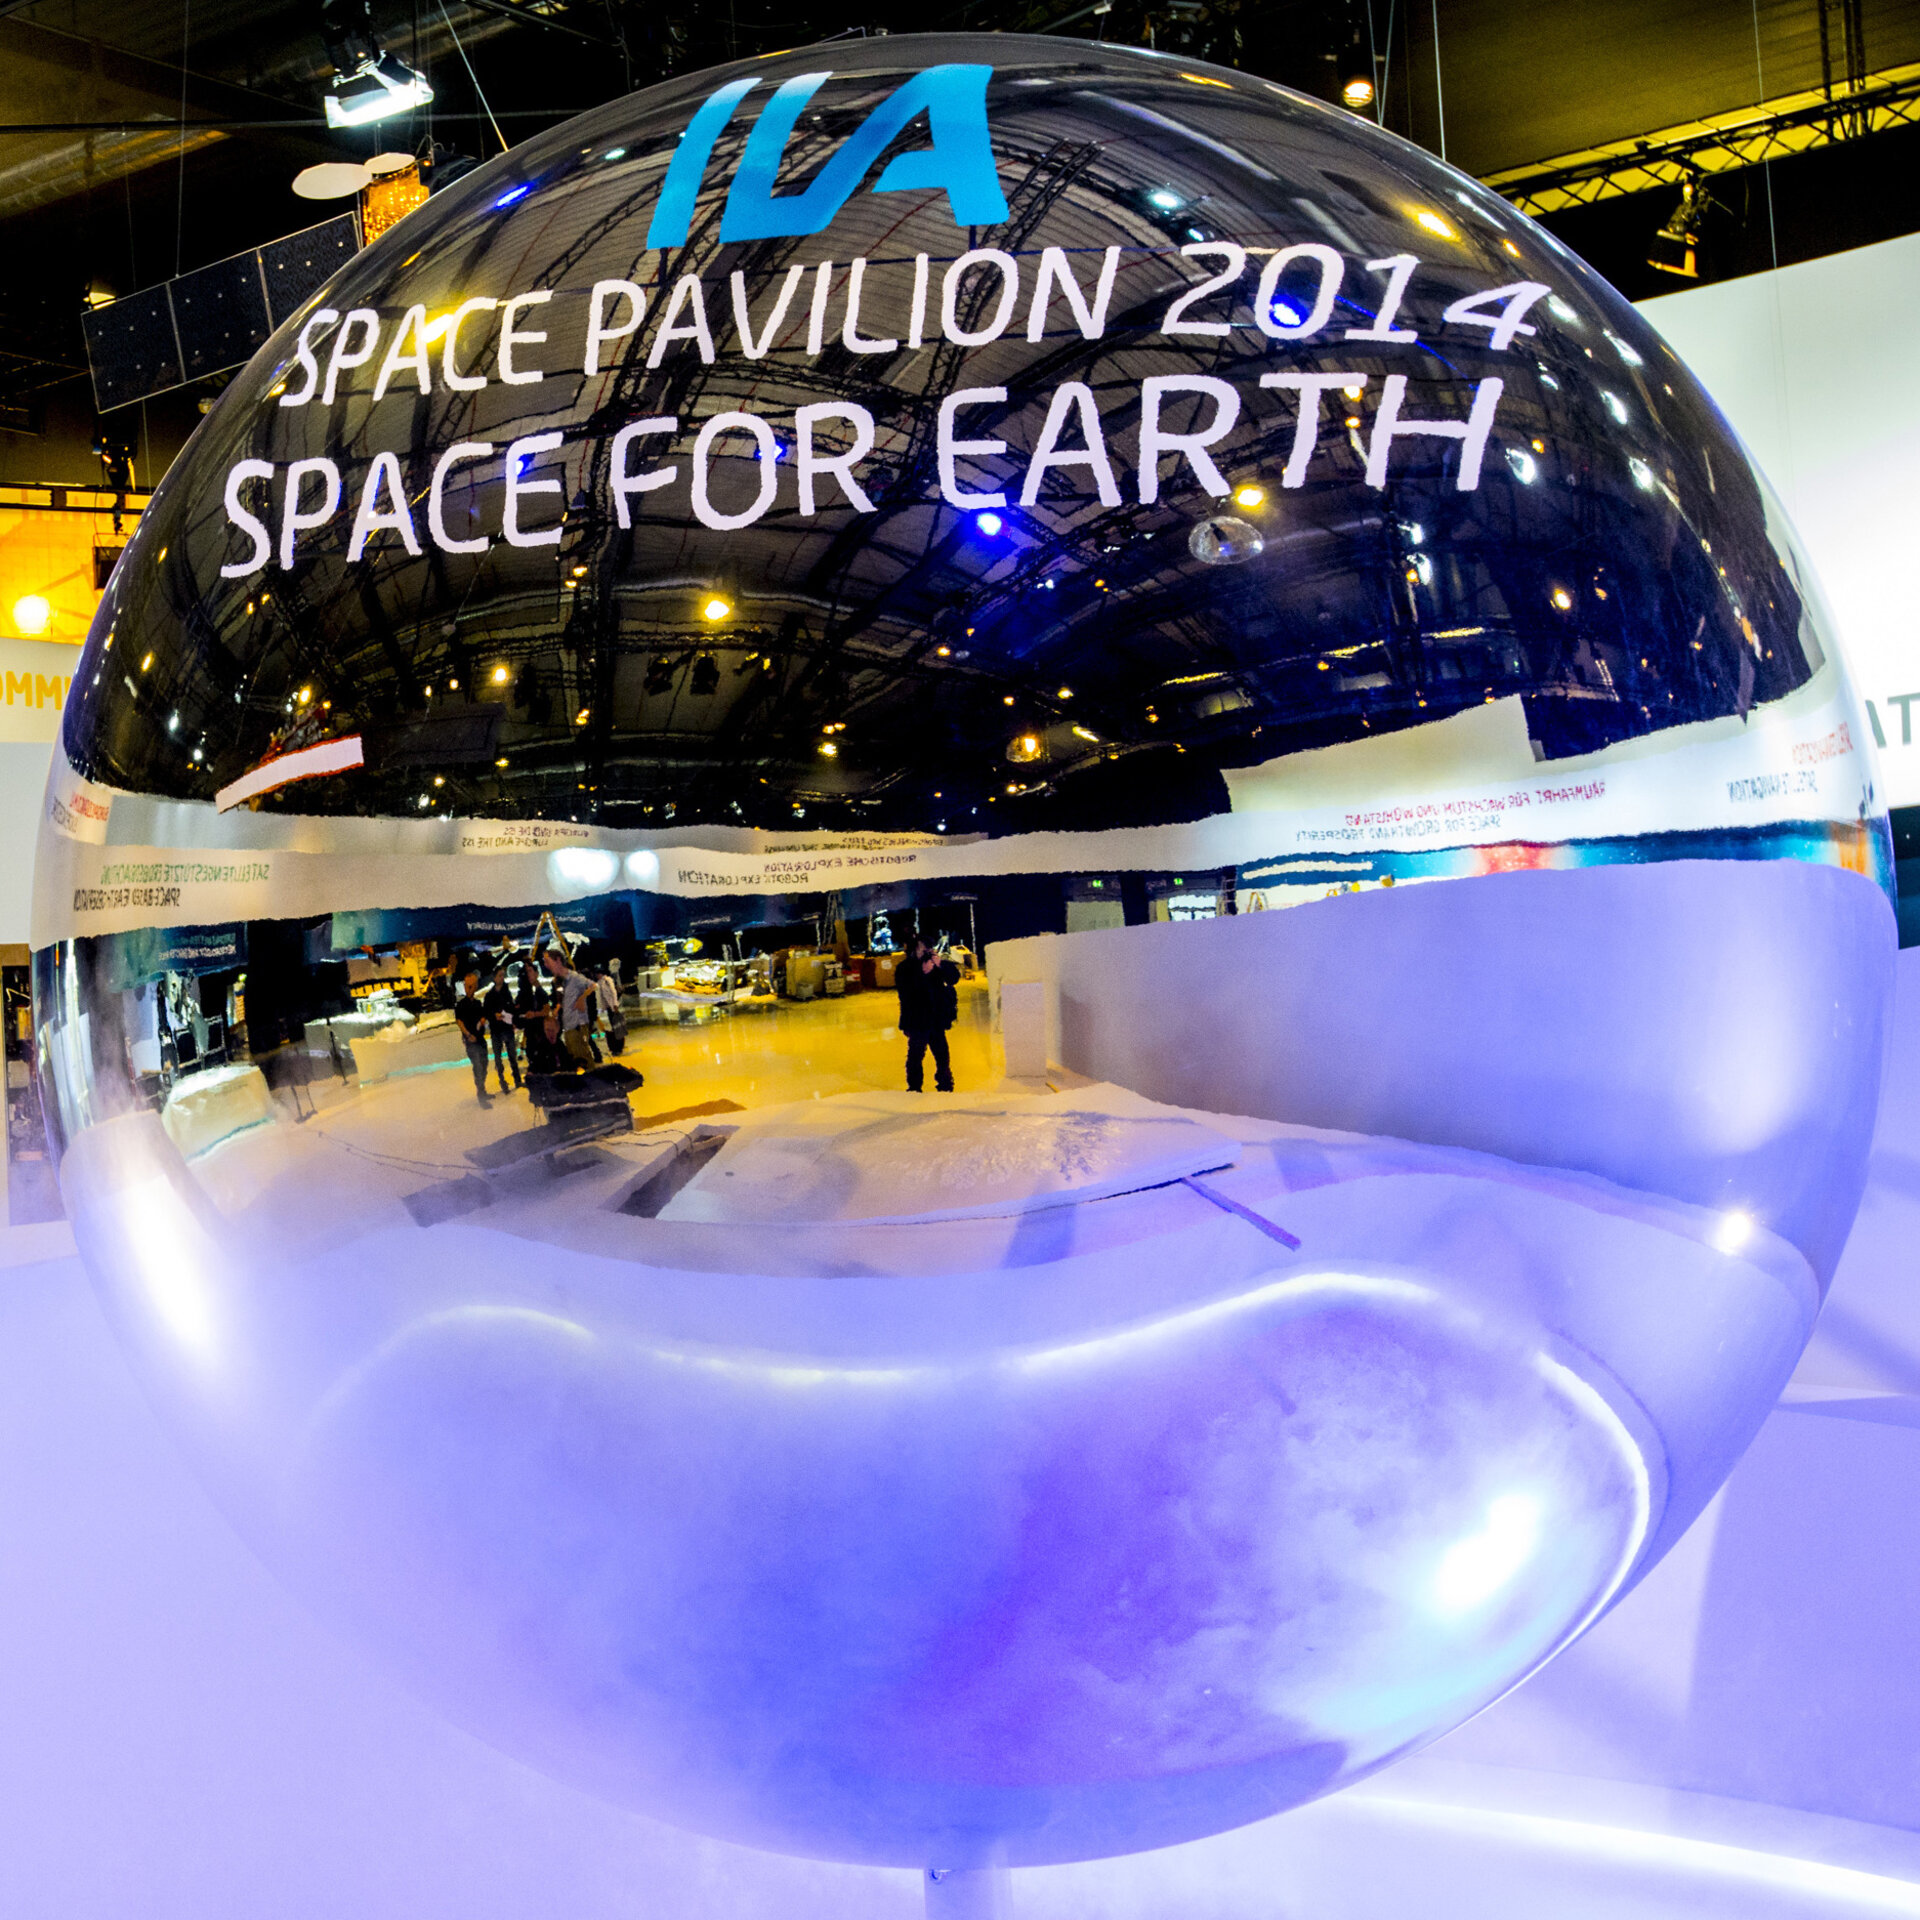 ‘Space for Earth’ space pavilion at ILA